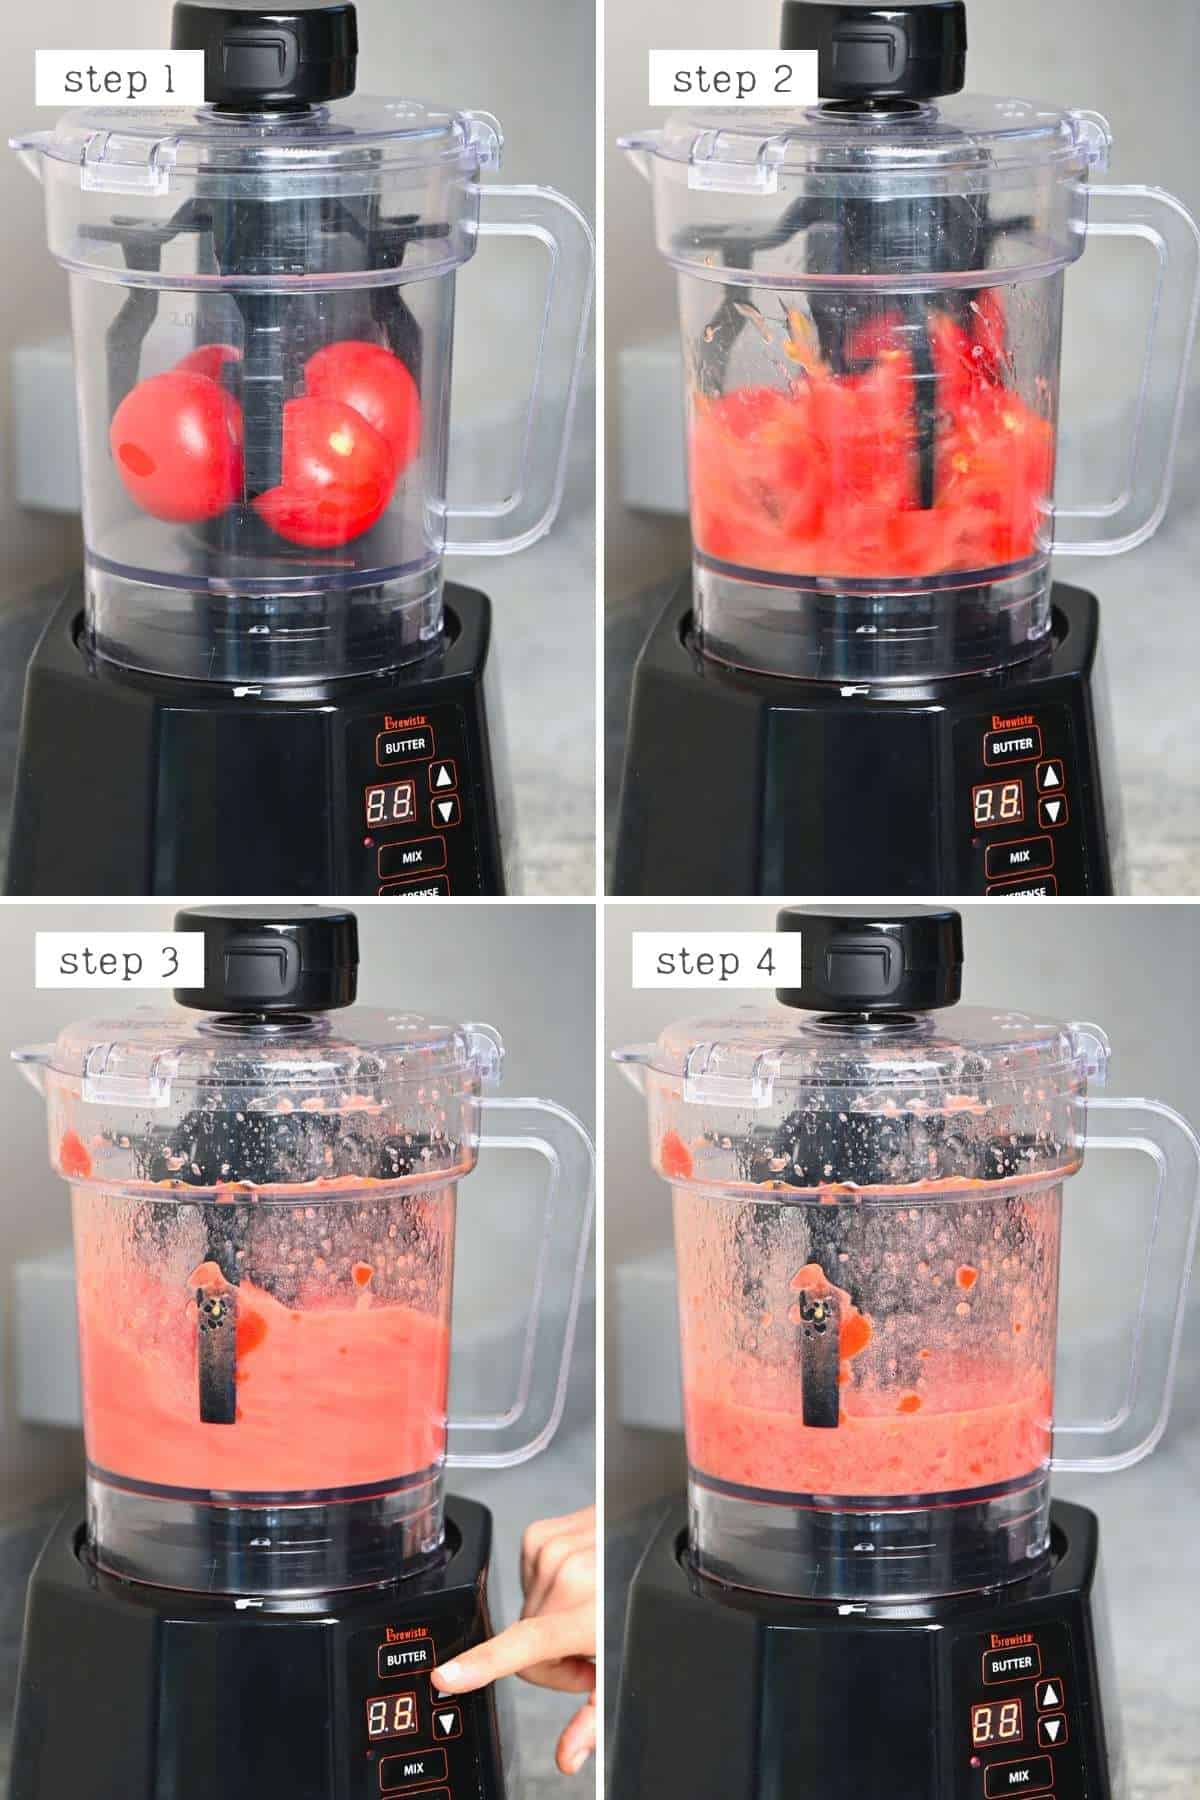 How To Make Tomato Juice In A Blender? 